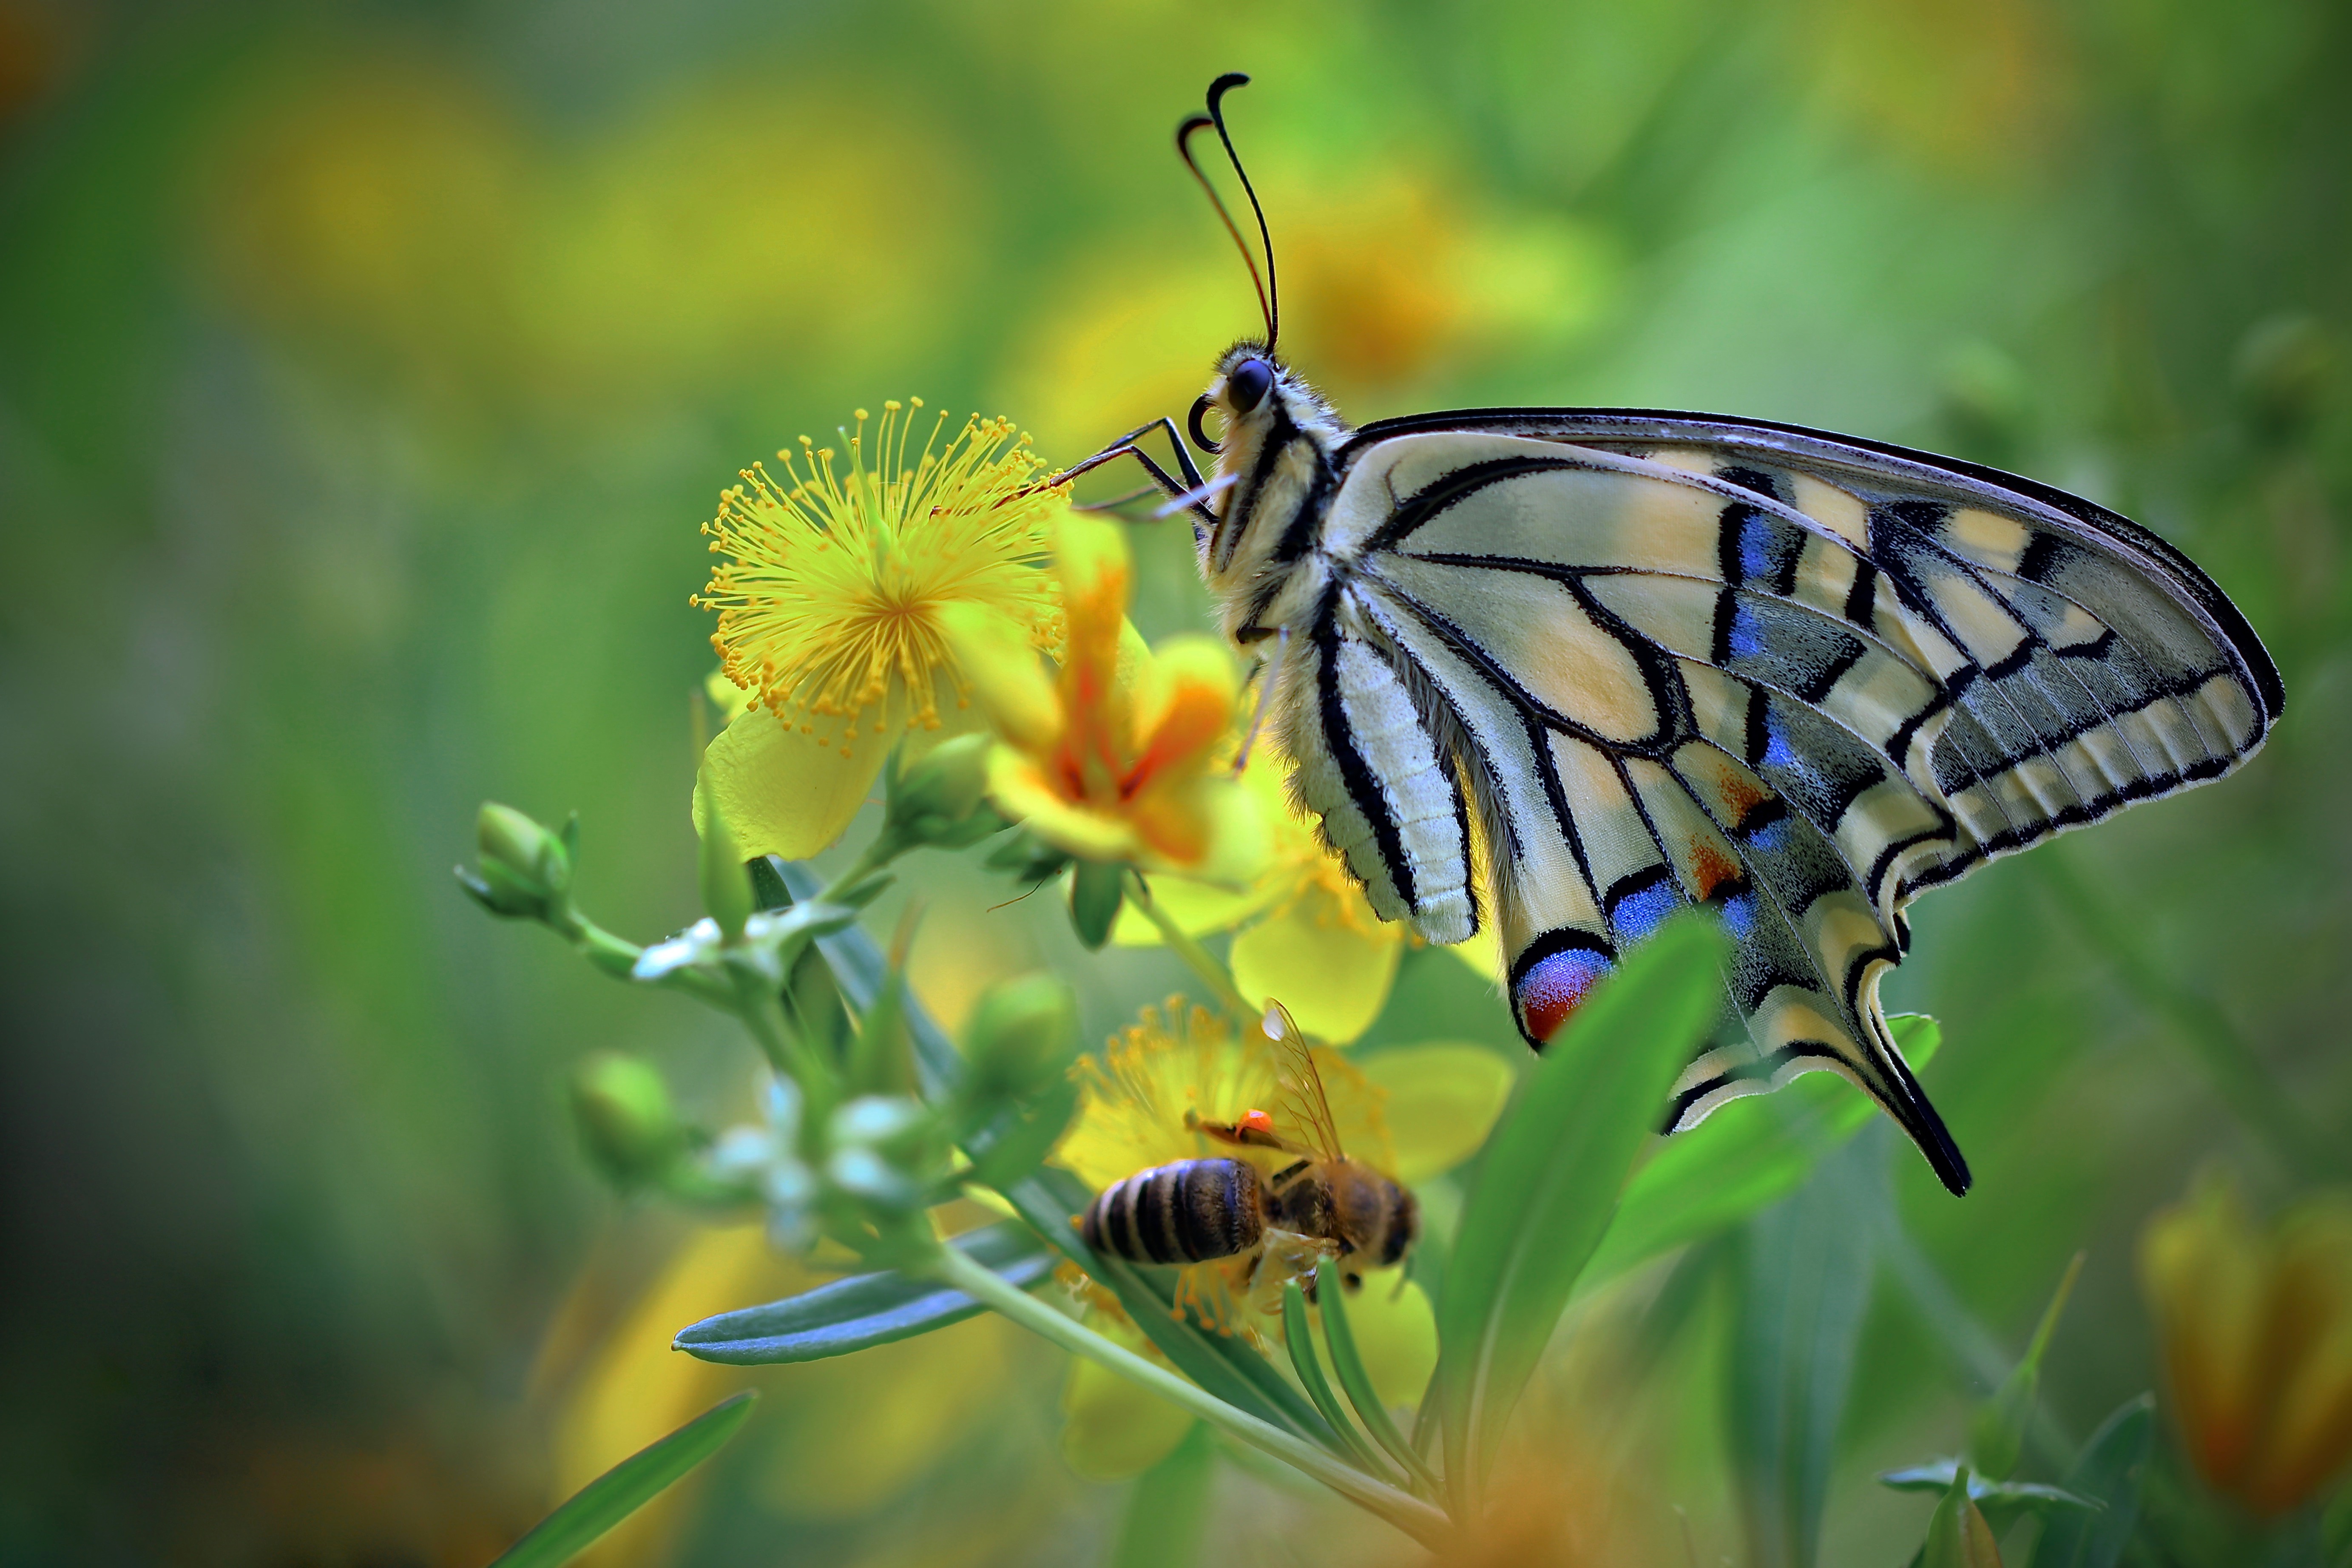 Wallpapers insects butterfly closeup on the desktop